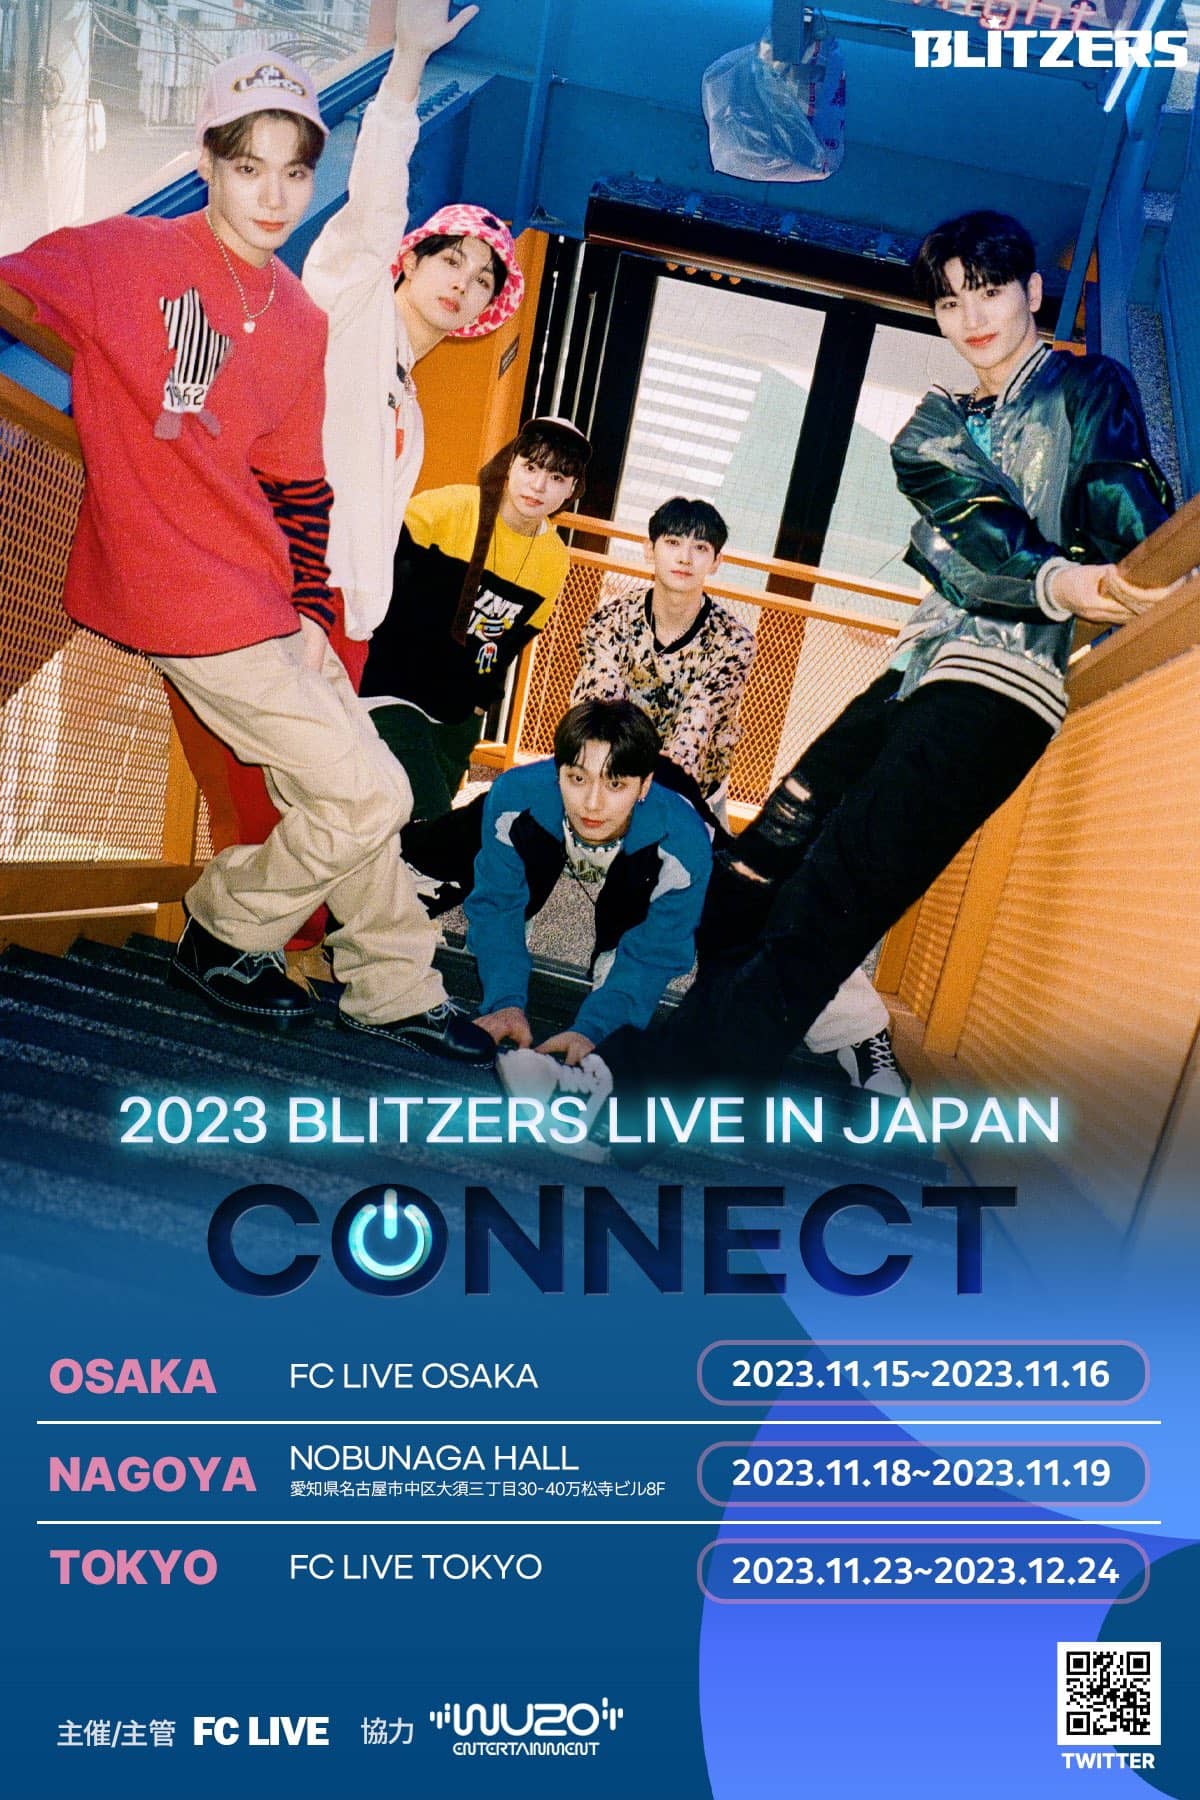 2023 BLITZERS LIVE IN JAPAN CONNECT - 無料プロモーション